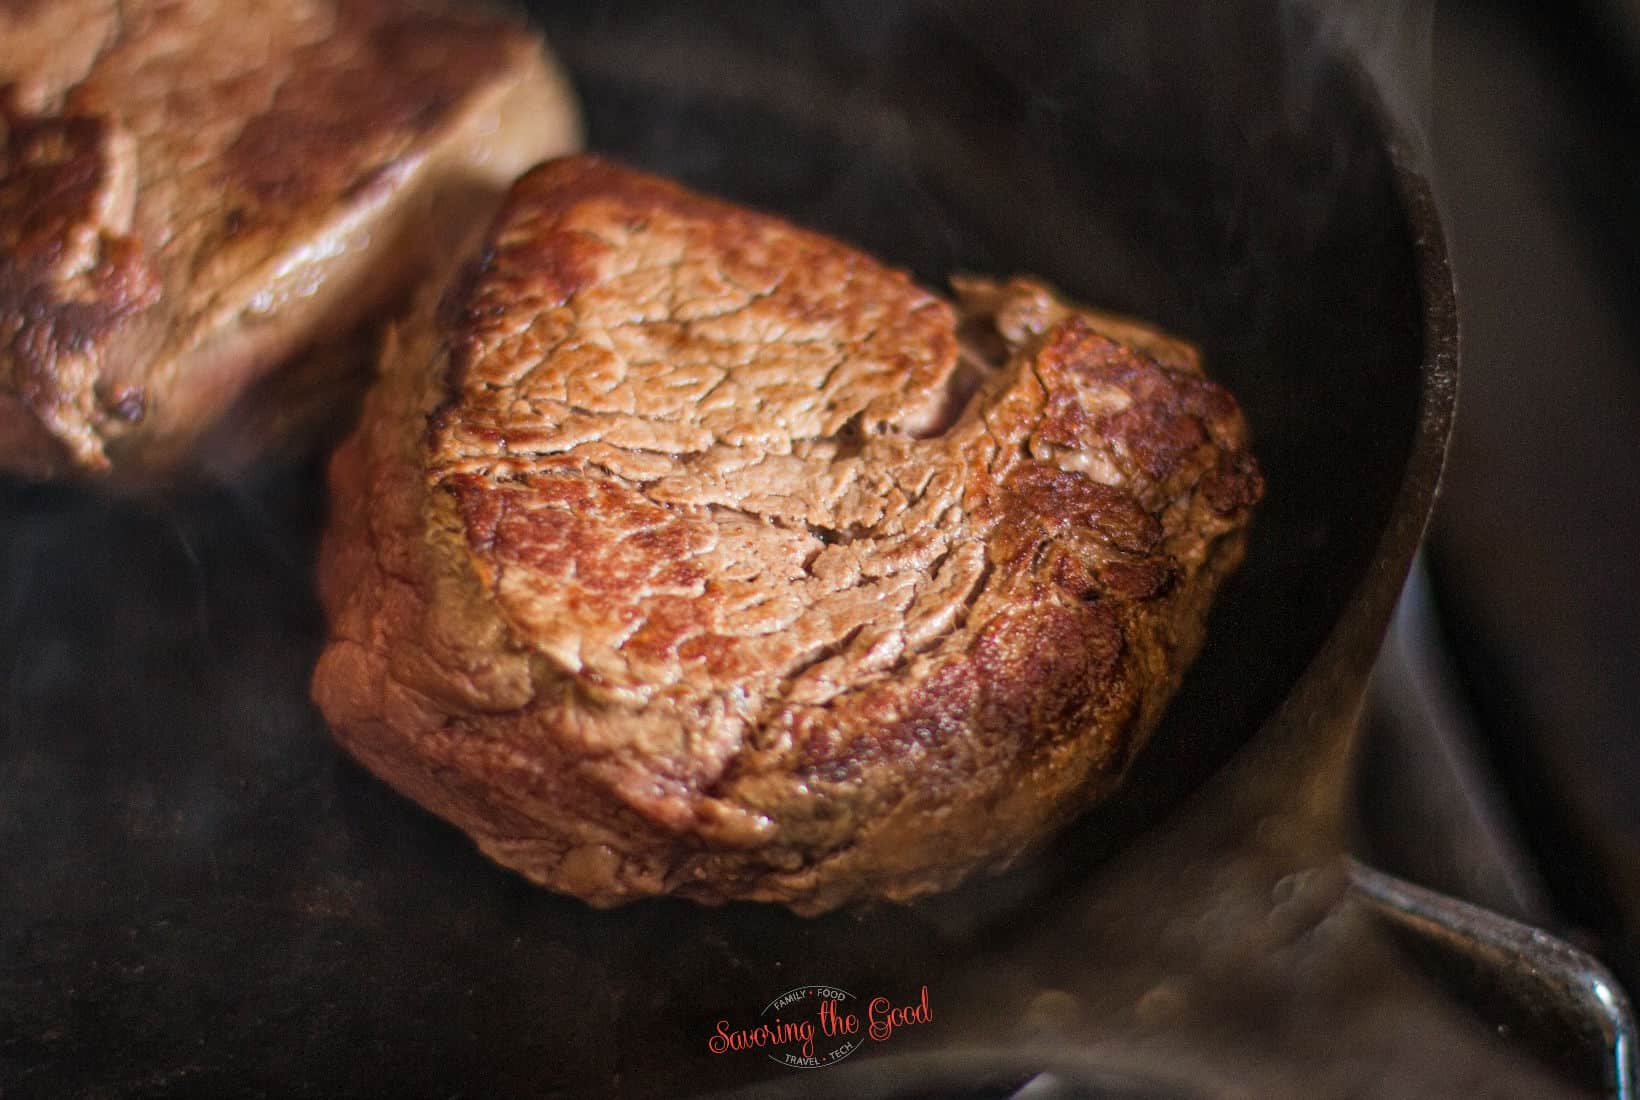 seared filet mignon, in a cast iron pan, ready to be cooked further.